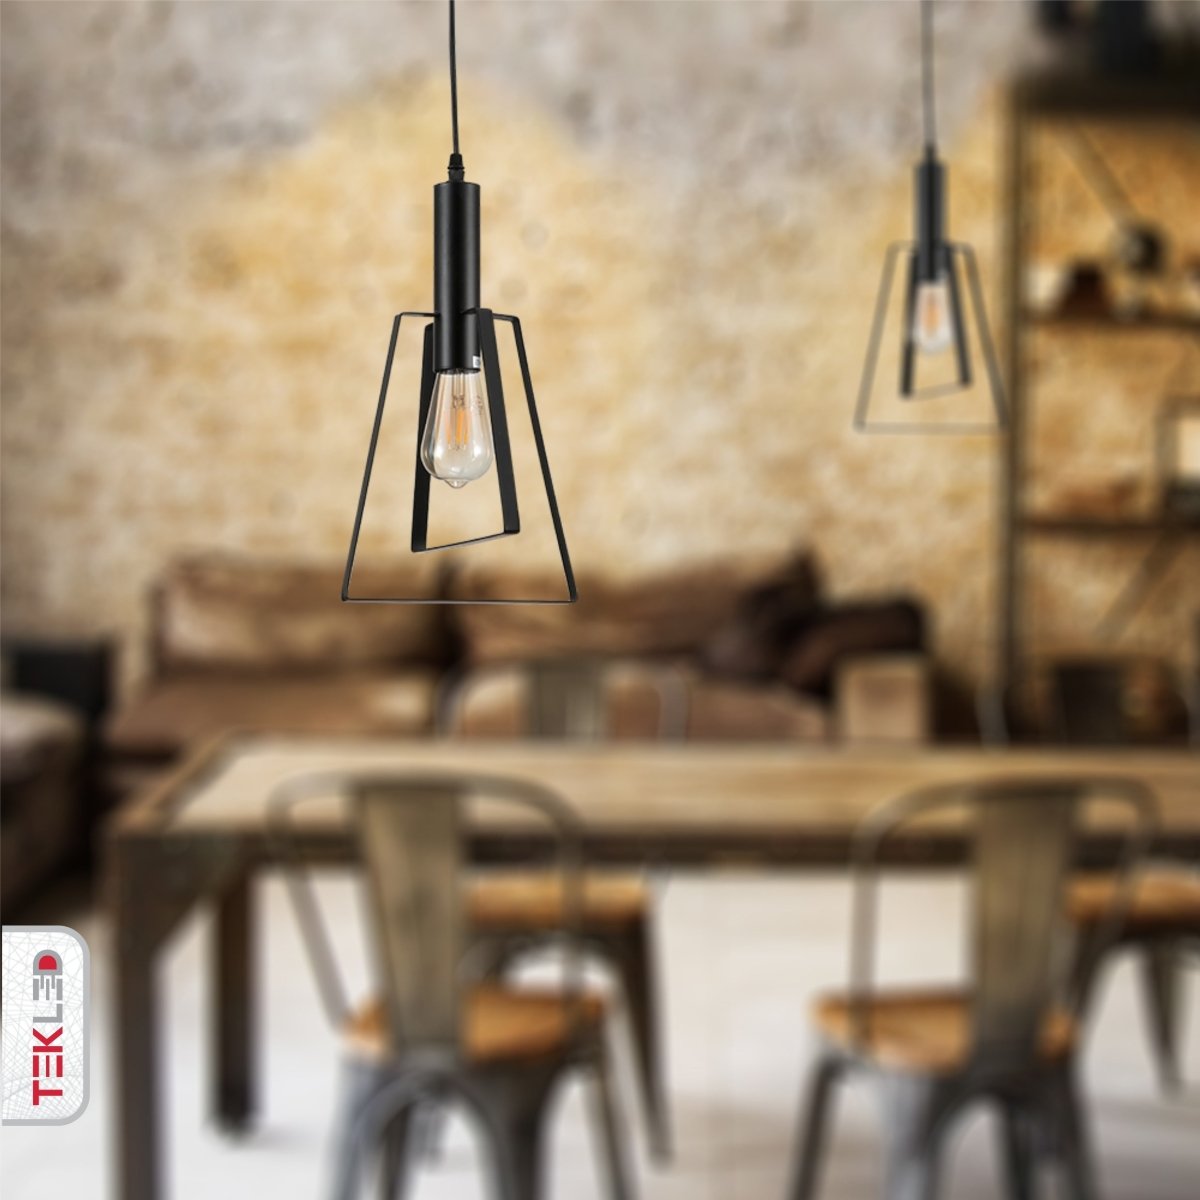 Indoor usage of Nordic Black Cage Pendant Light with E27 Fitting | TEKLED 159-17500